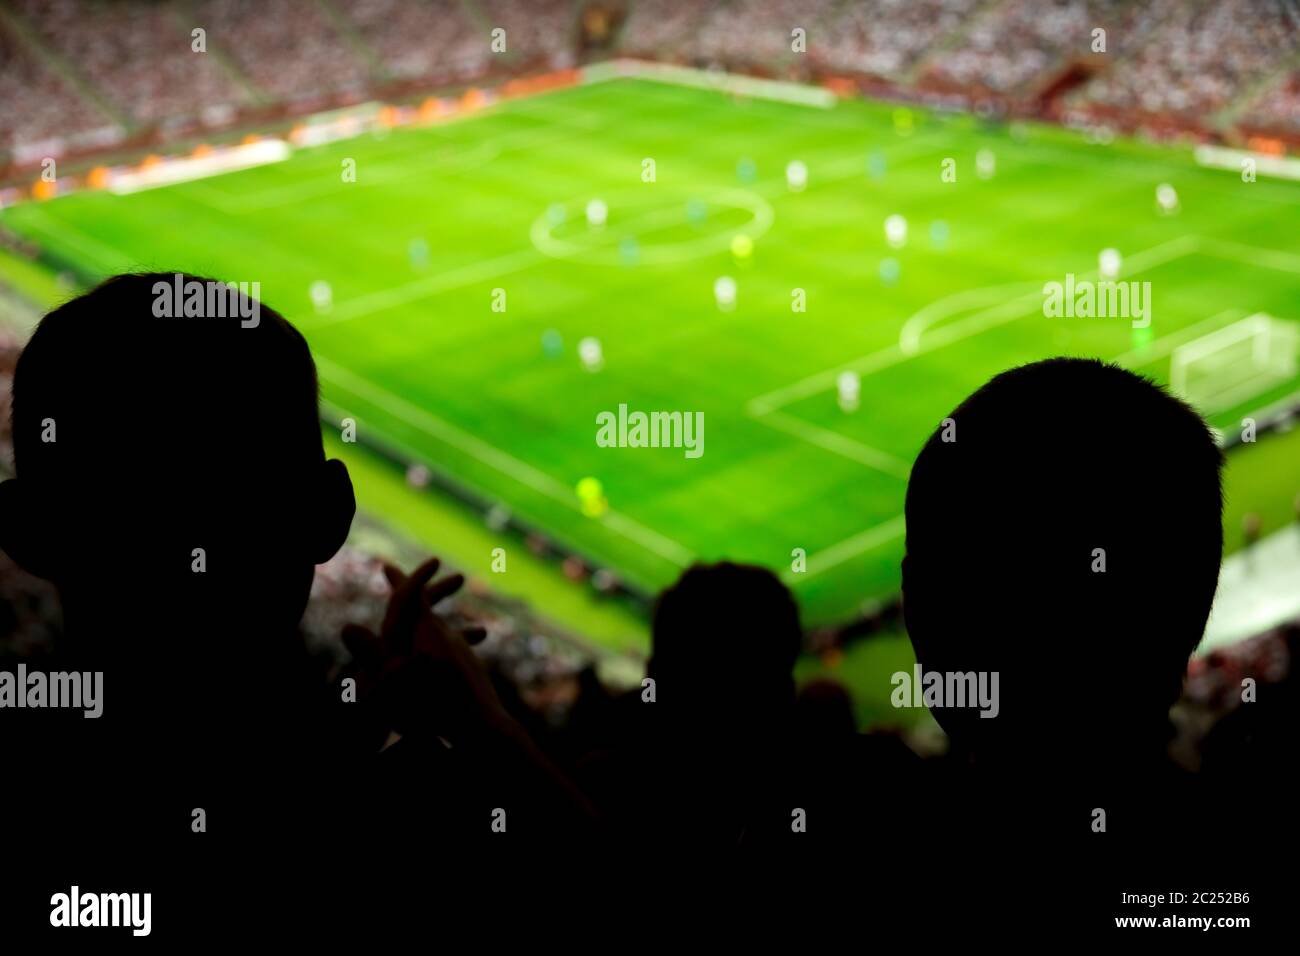 Soccer stadium with people watching game in progress Stock Photo